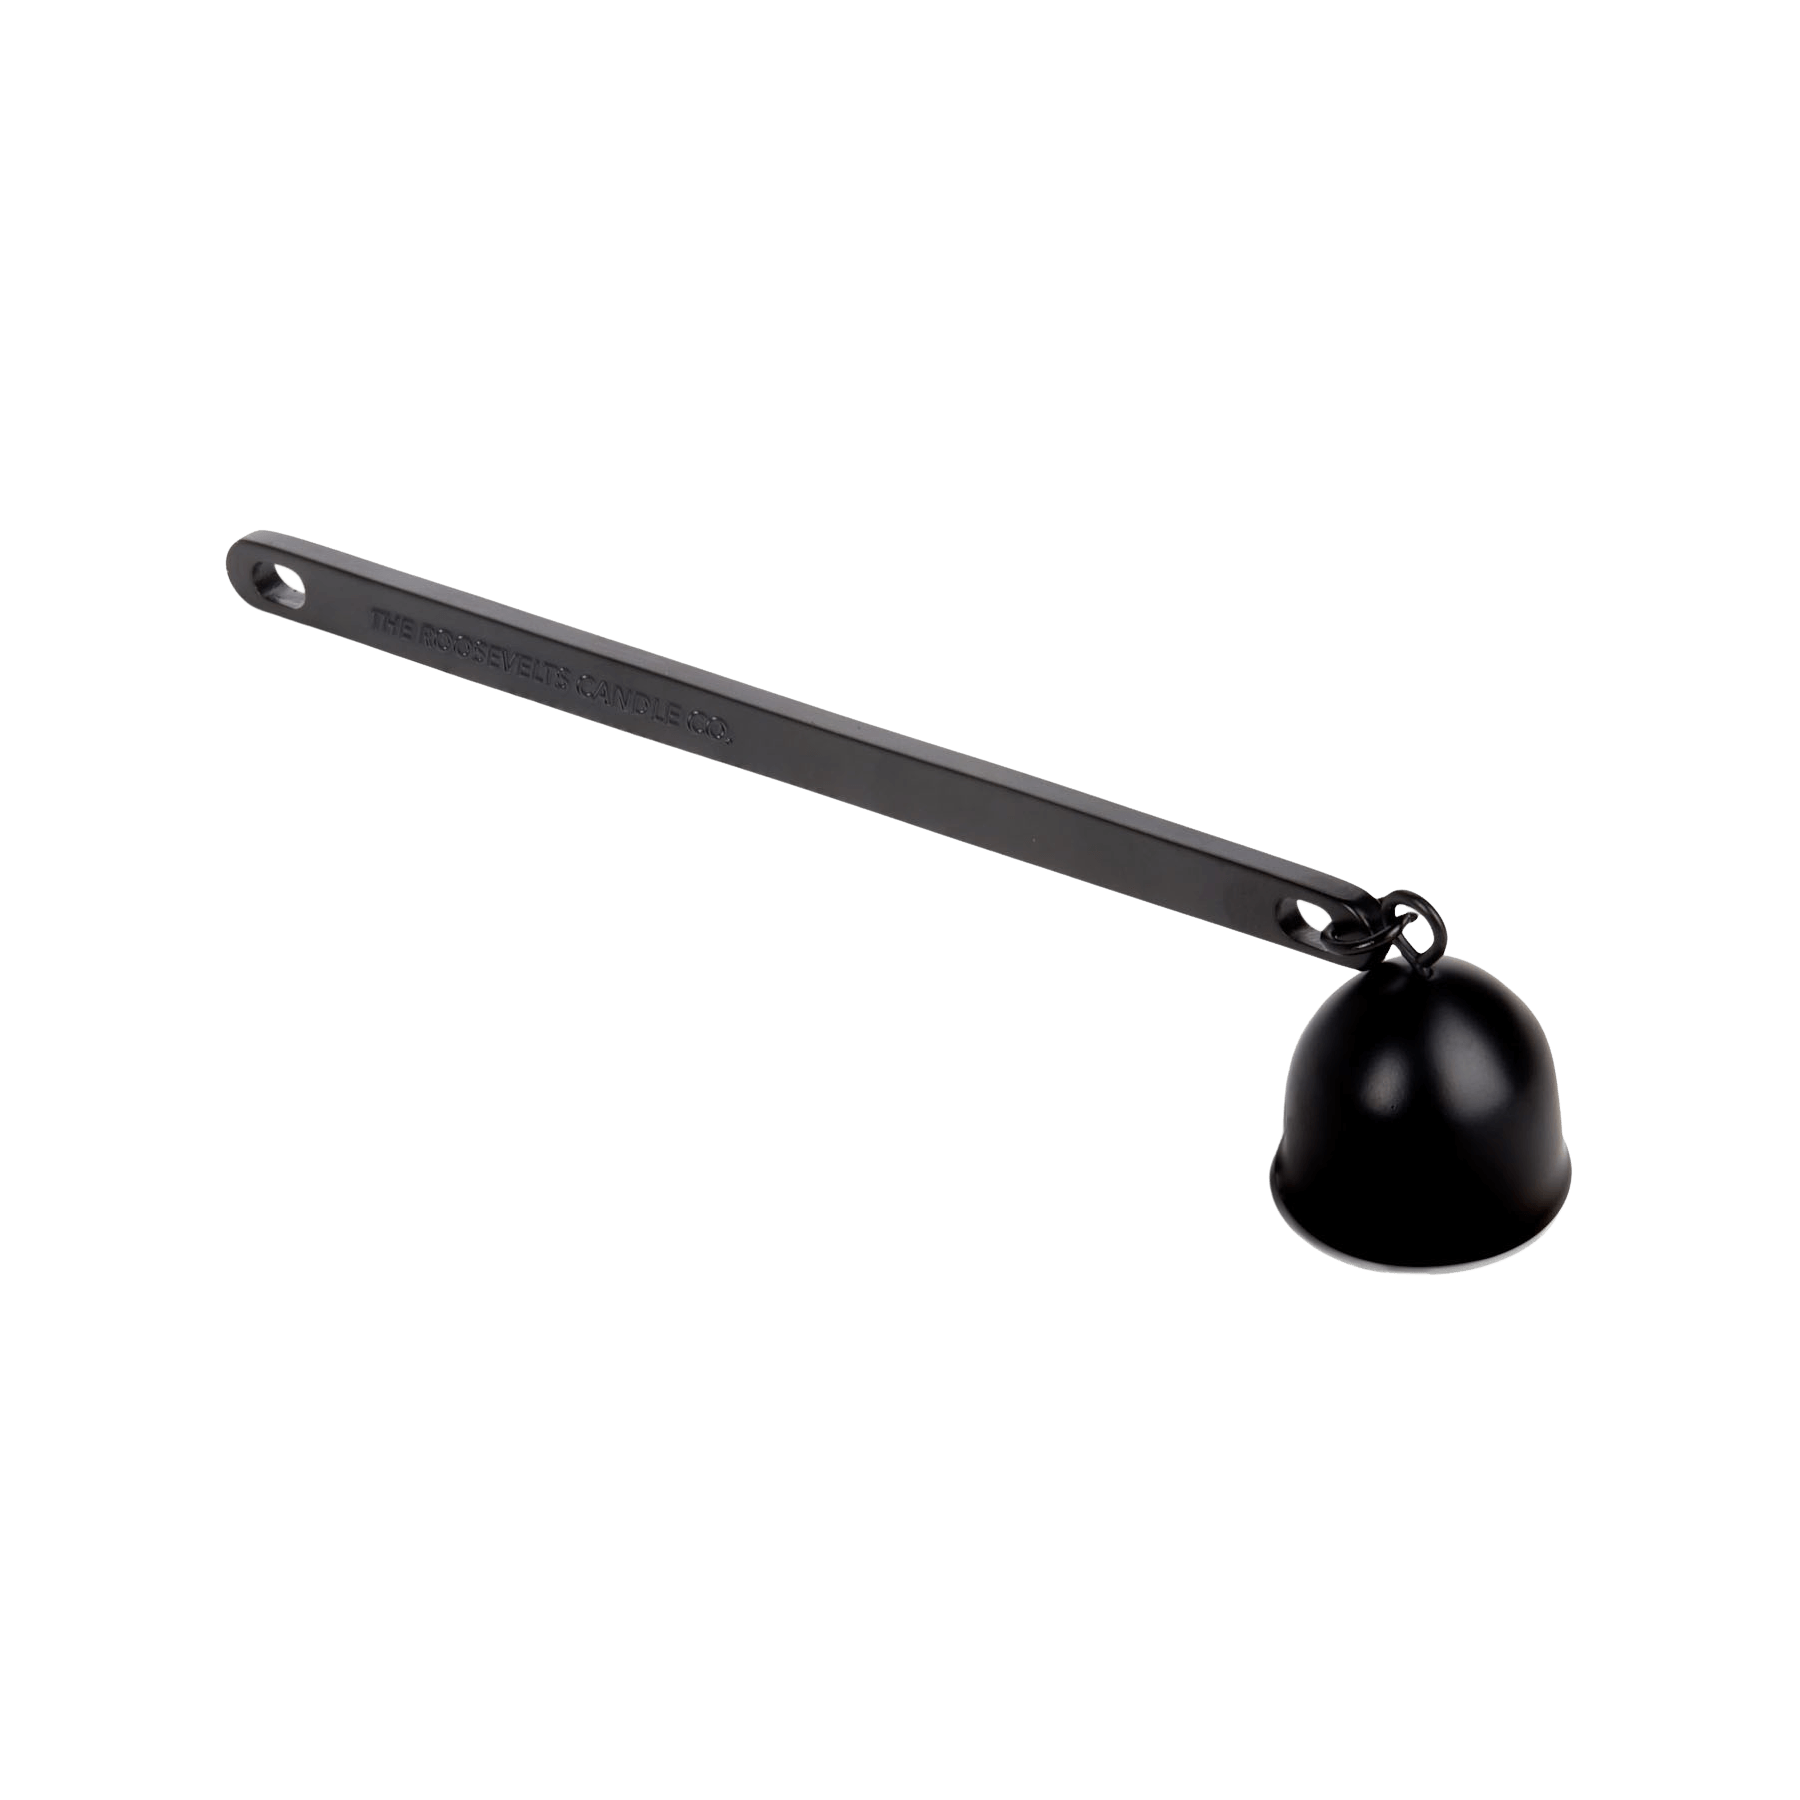 black candle snuffer - the roosevelts candle co